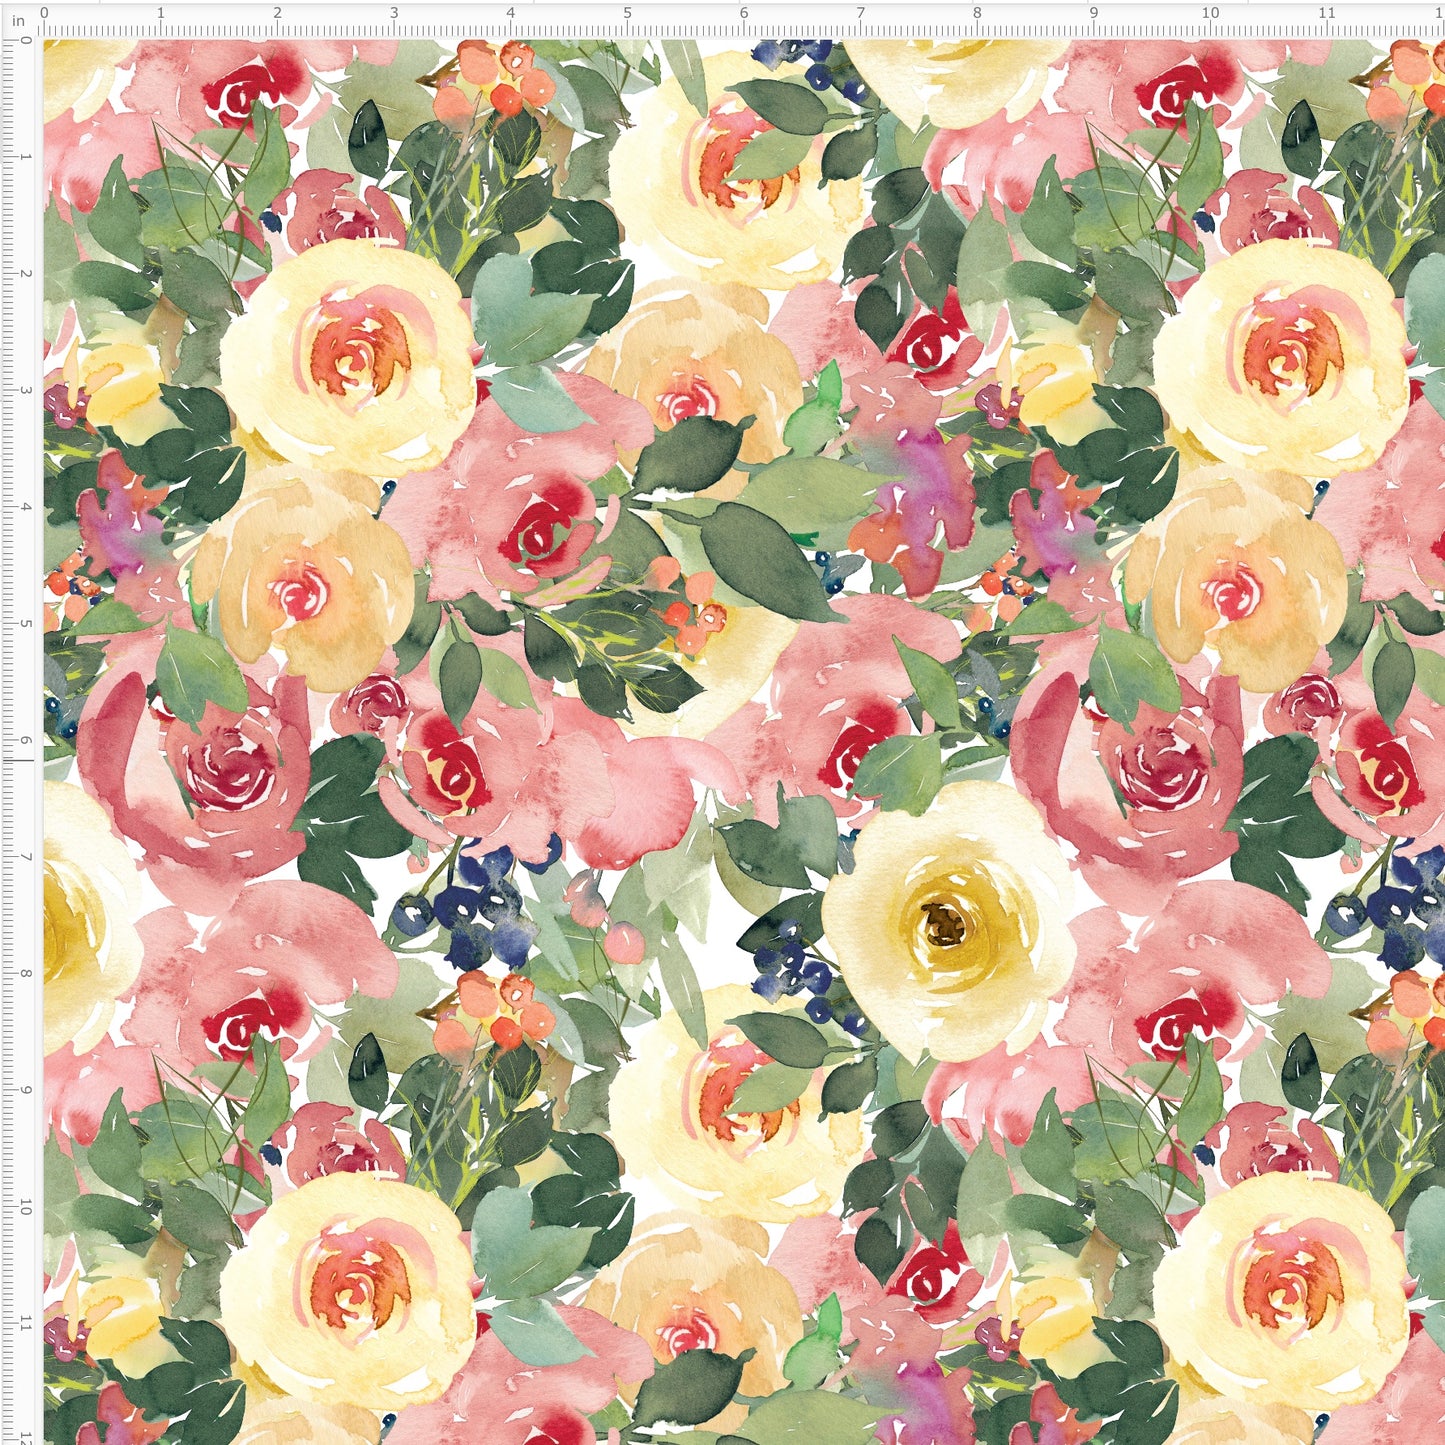 Peaches and Cream Roses Waterproof Oxford